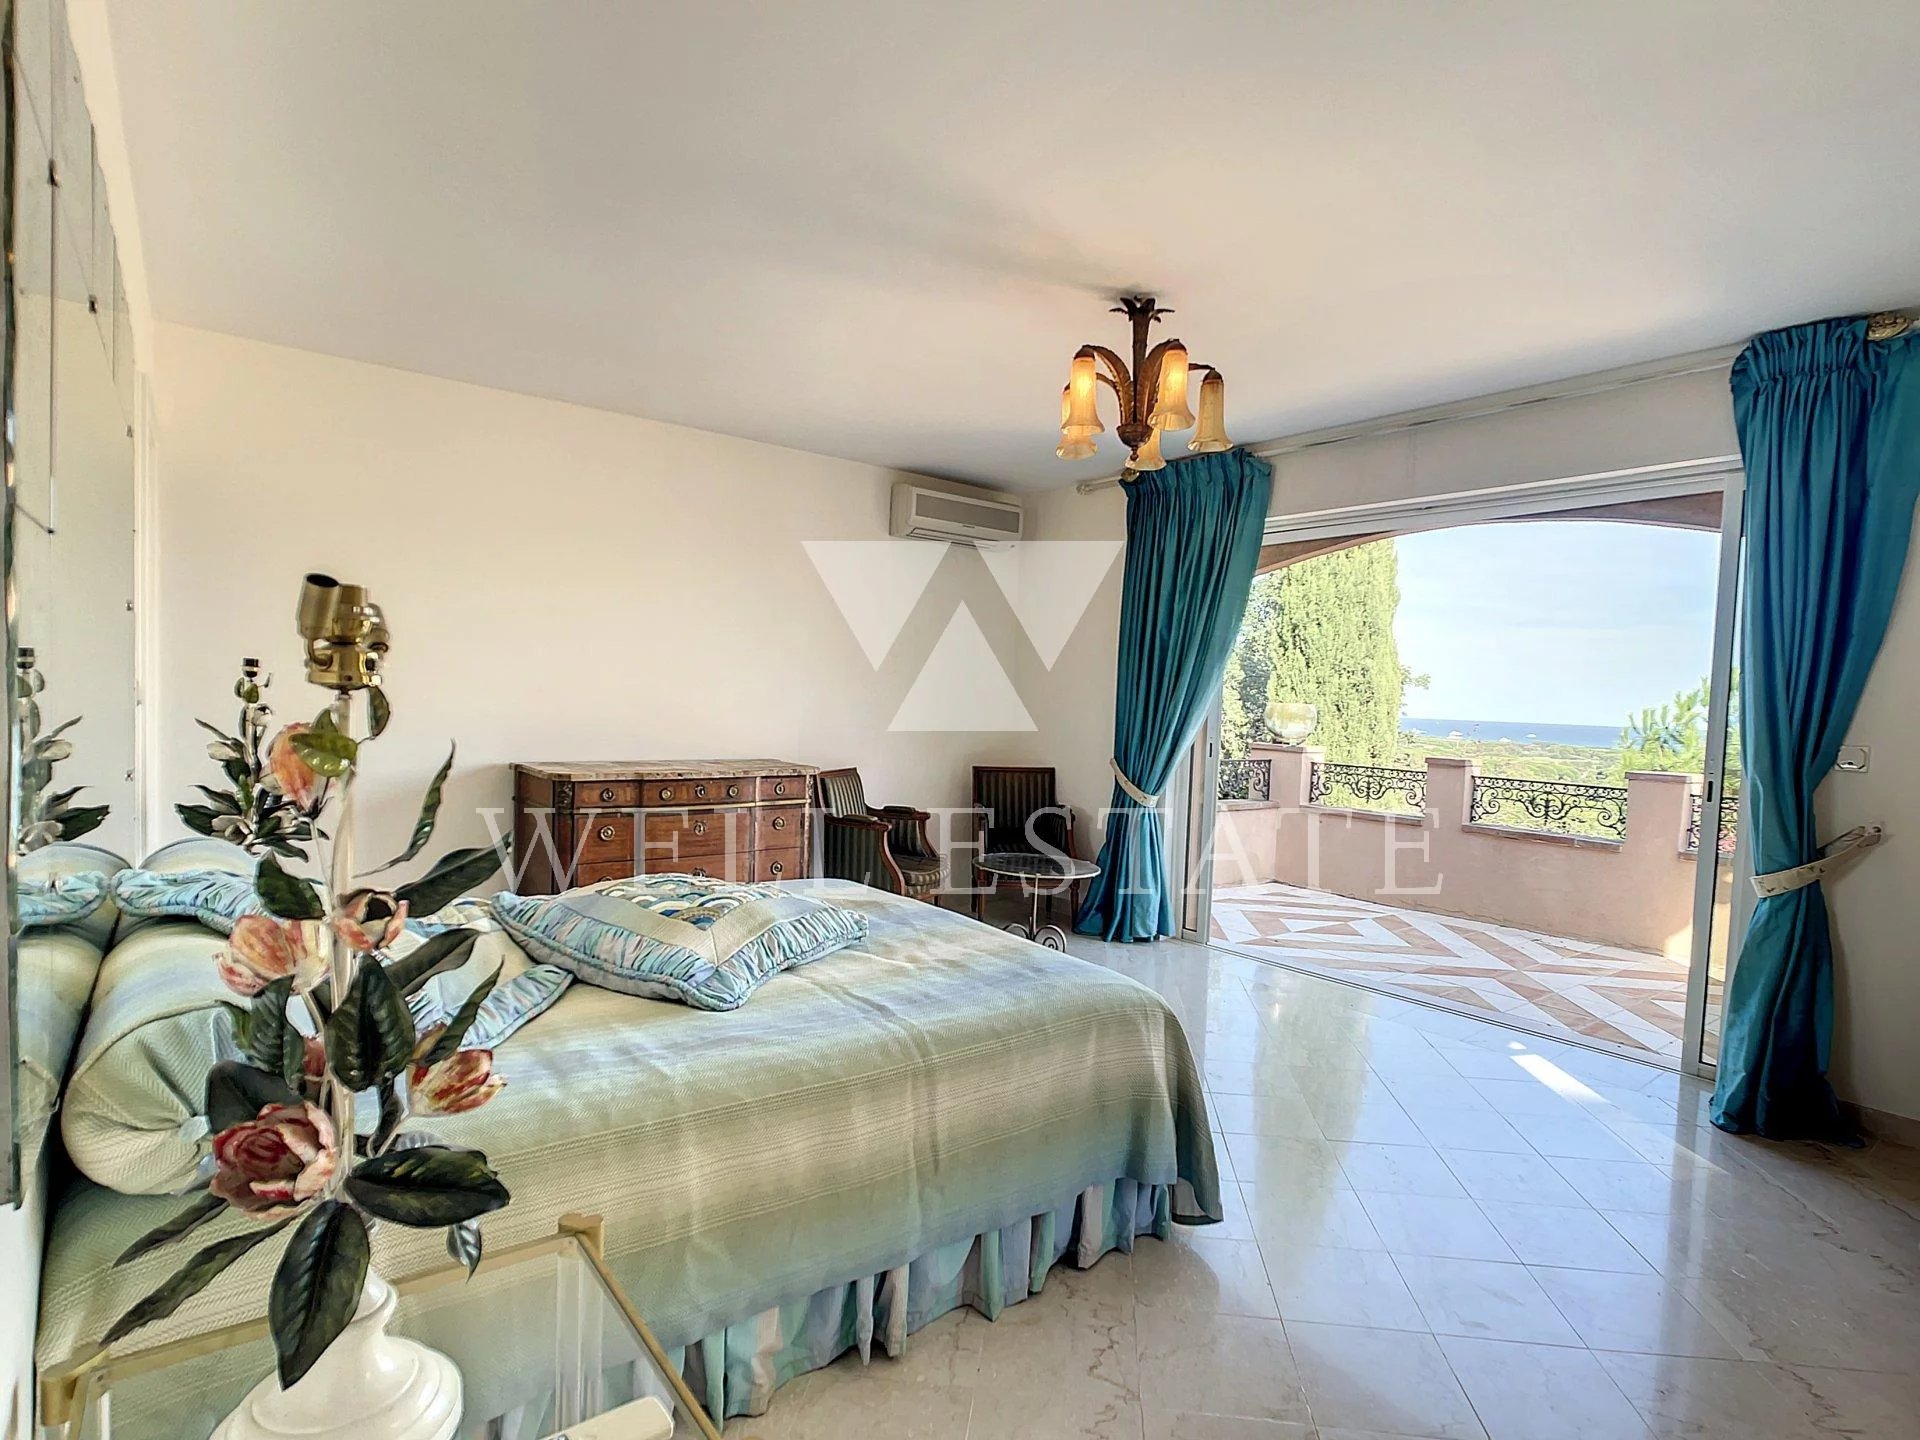 RAMATUELLE VILLA 330M2 ON 1 HECTARE NEAR THE BEACHES WITH PANORAMIC SEA VIEW